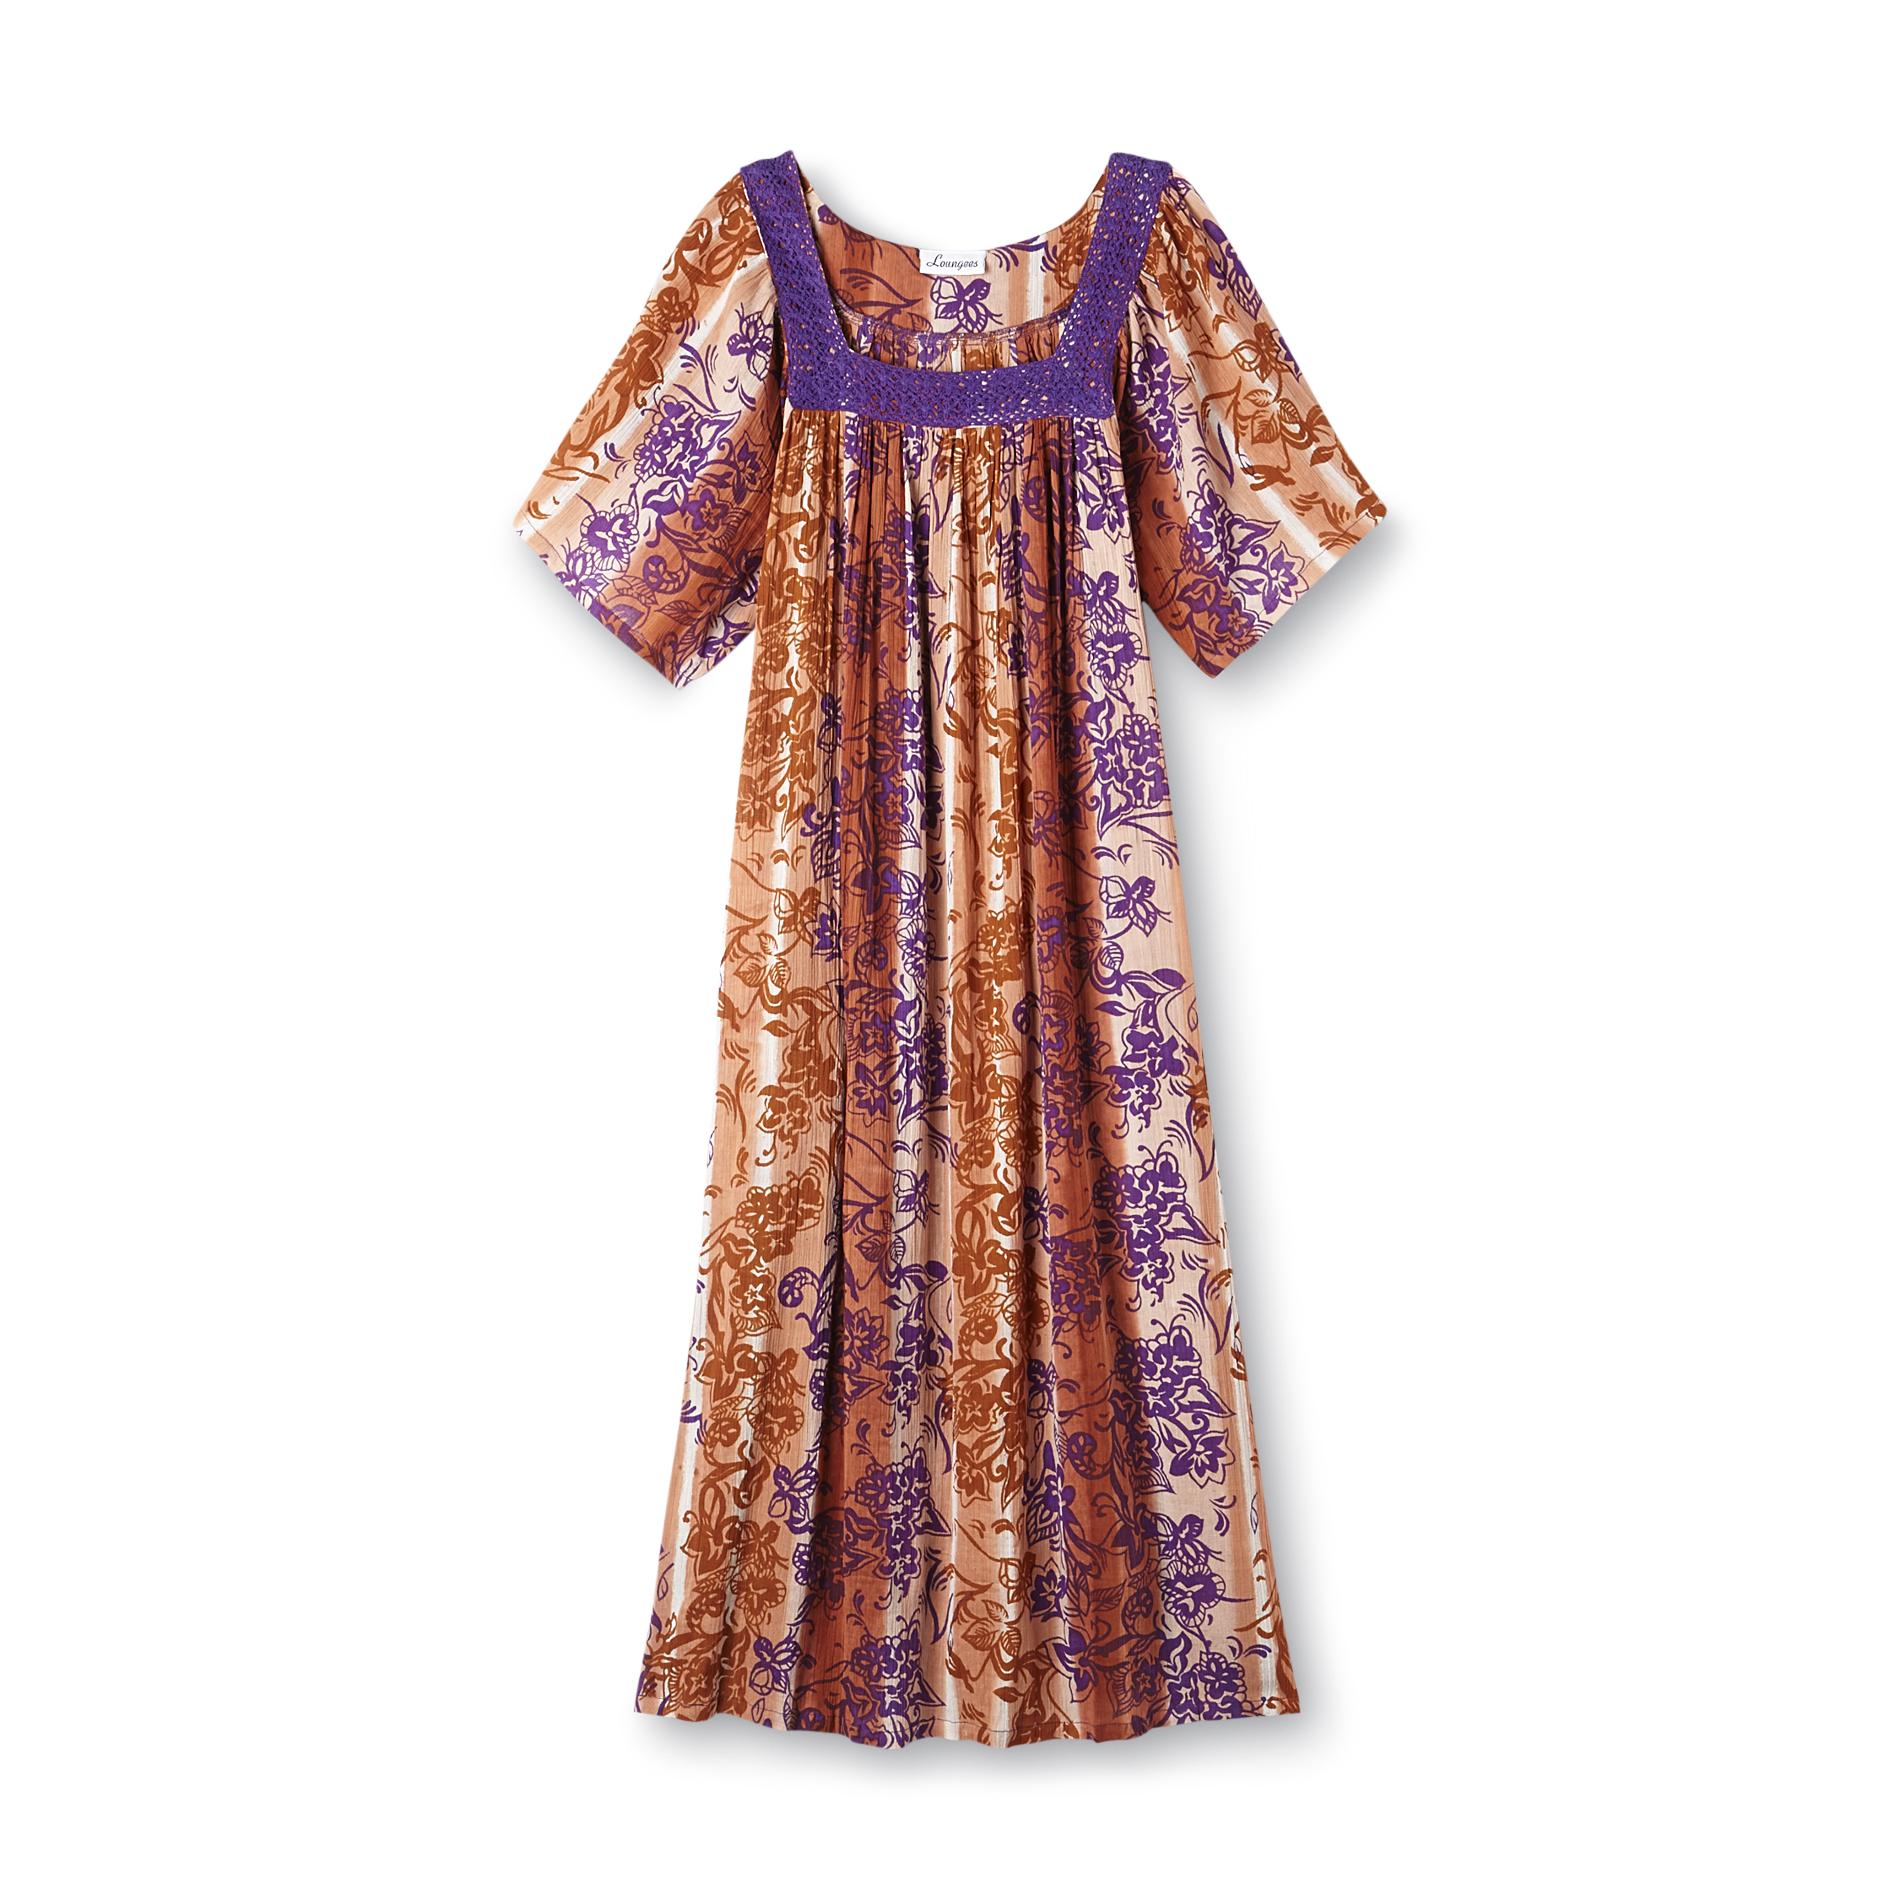 Loungees Women's Caftan Nightgown - Floral